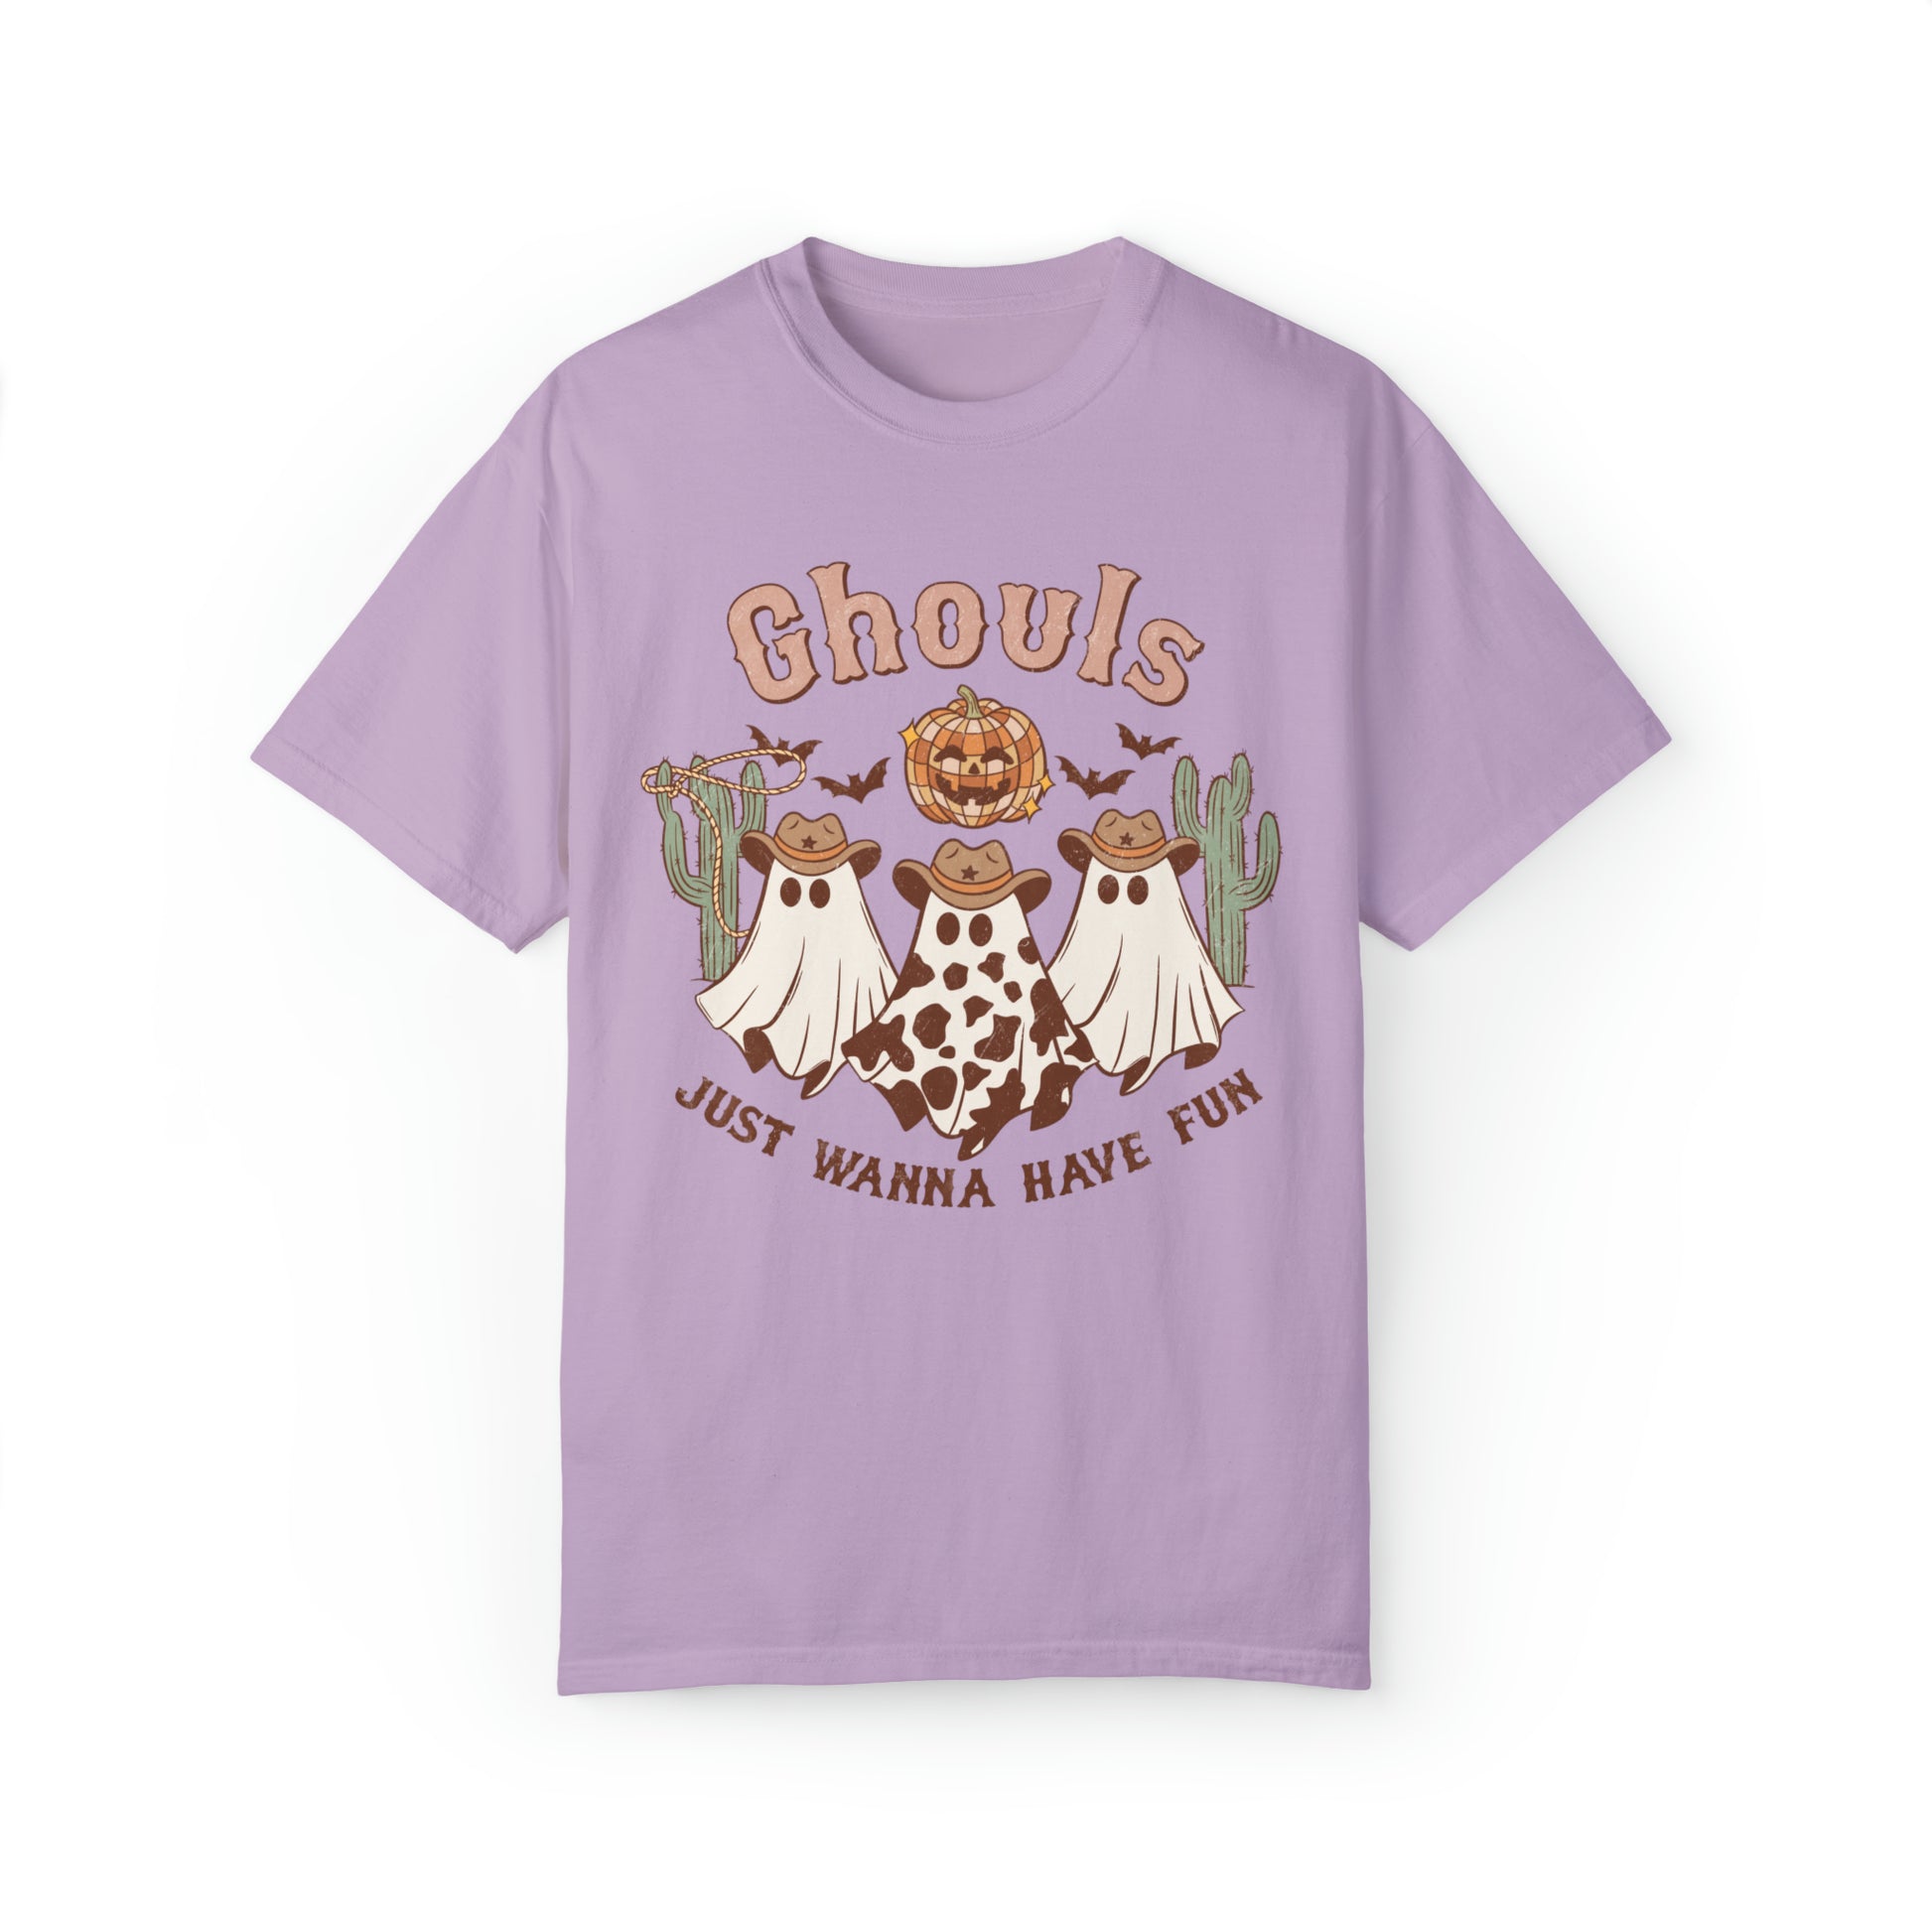 Ghouls Just Want to Have Fun Comfort Colors Halloween Shirt